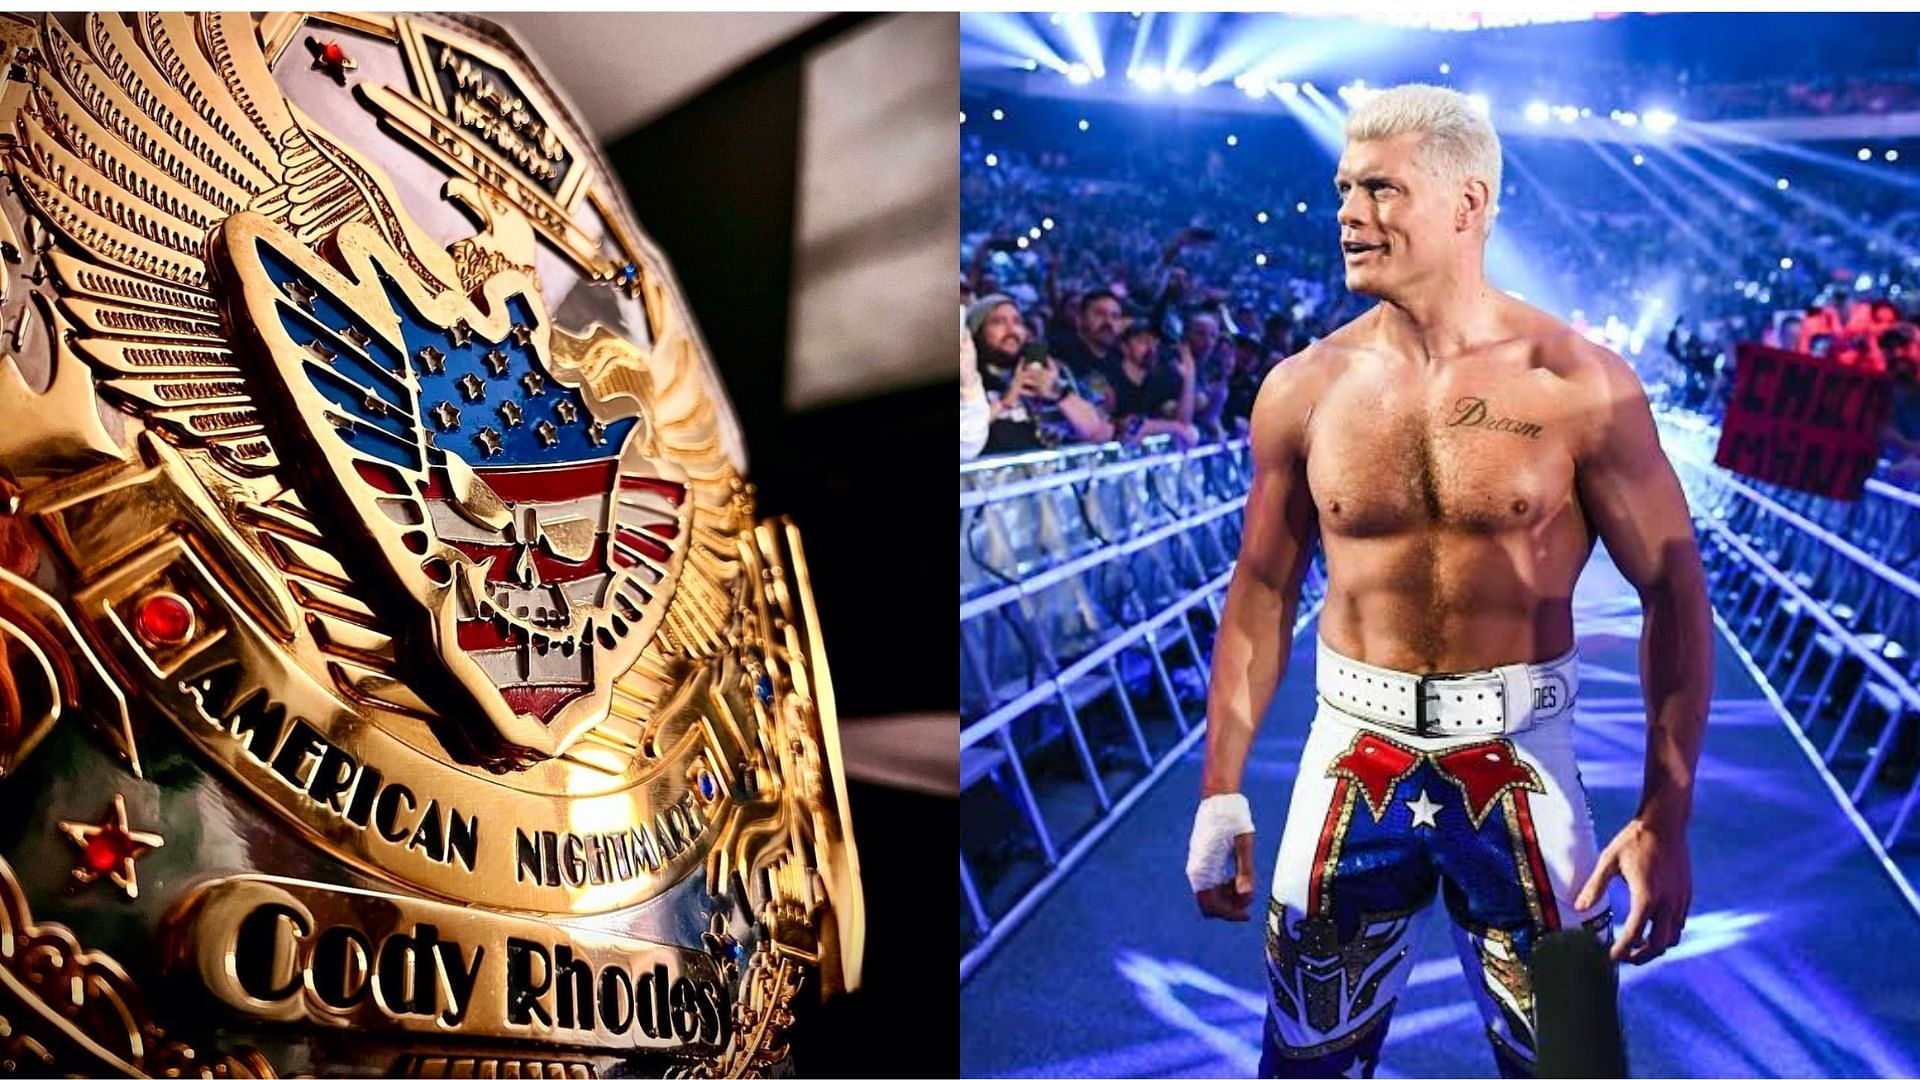 A Cody Rhodes custom-themed championship belt is doing the rounds on Twitter